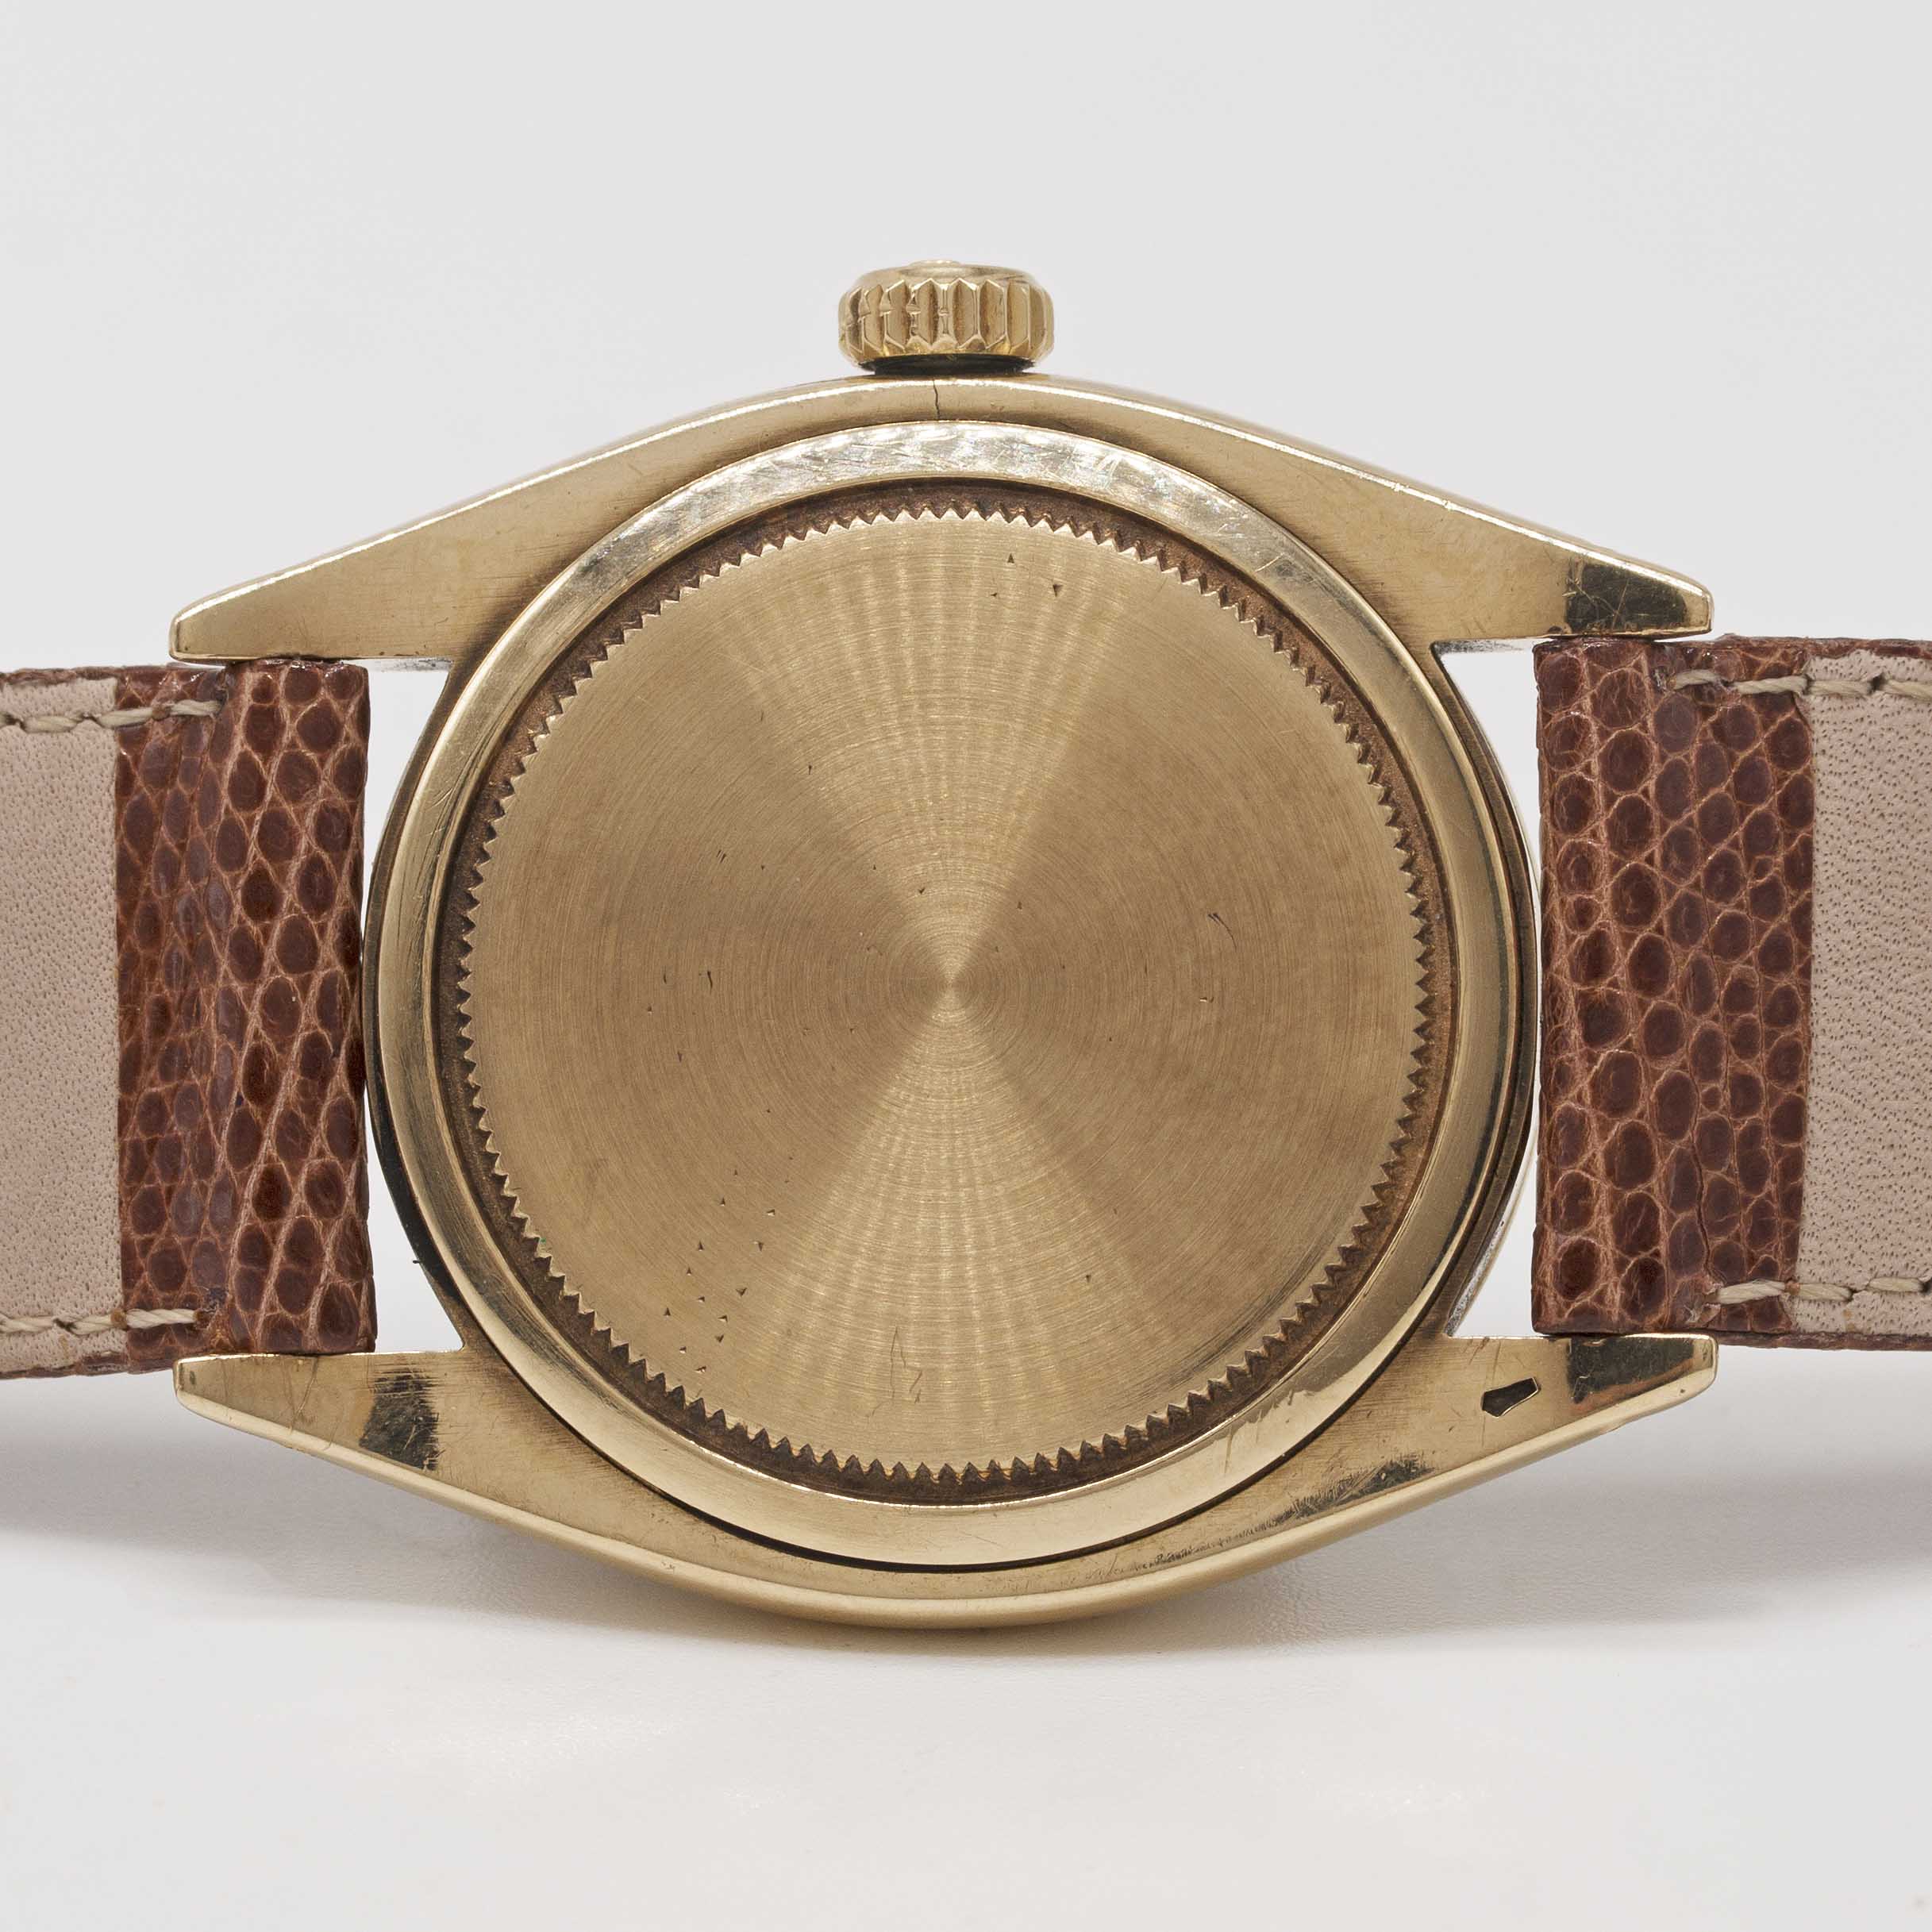 A GENTLEMAN'S 9CT SOLID GOLD ROLEX OYSTER PRECISION WRIST WATCH CIRCA 1959, REF. 6426 WITH 3-6-9 " - Image 5 of 8